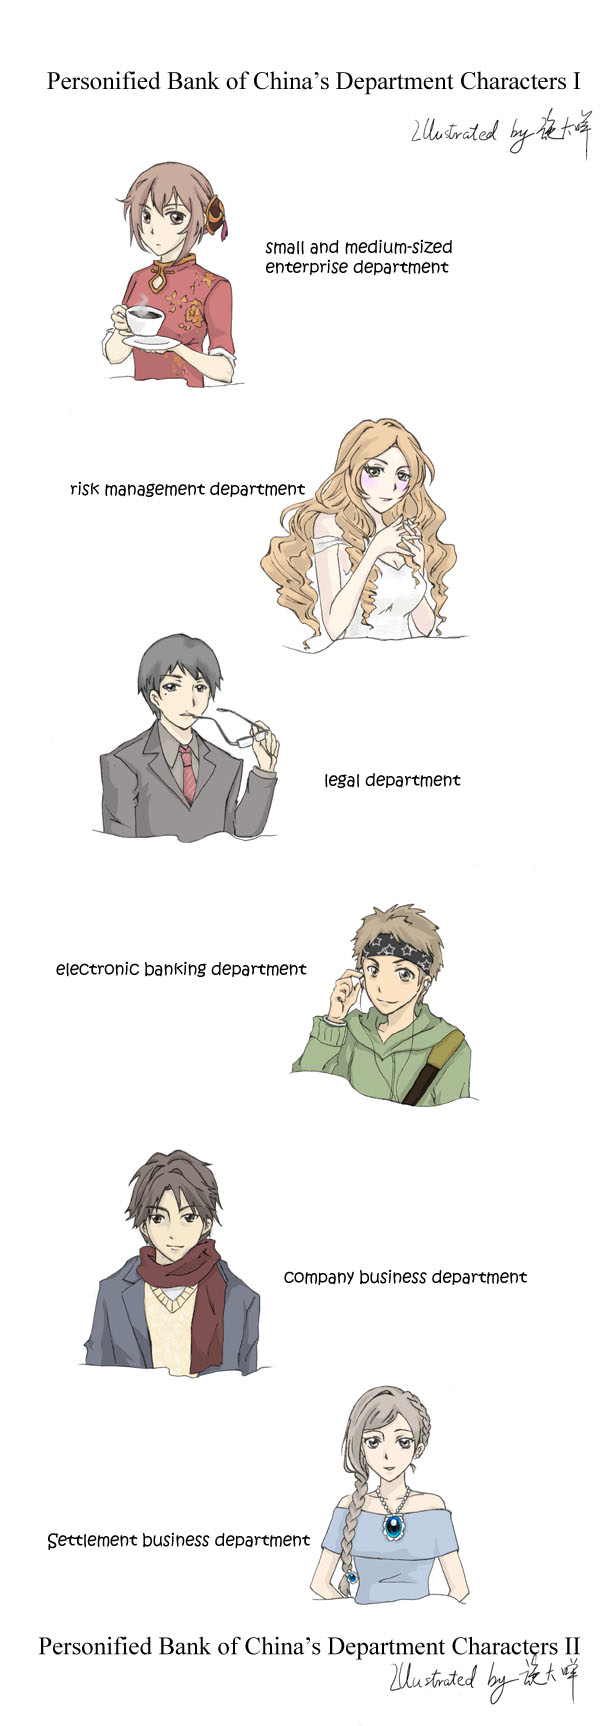 Personified Bank's Department Characters